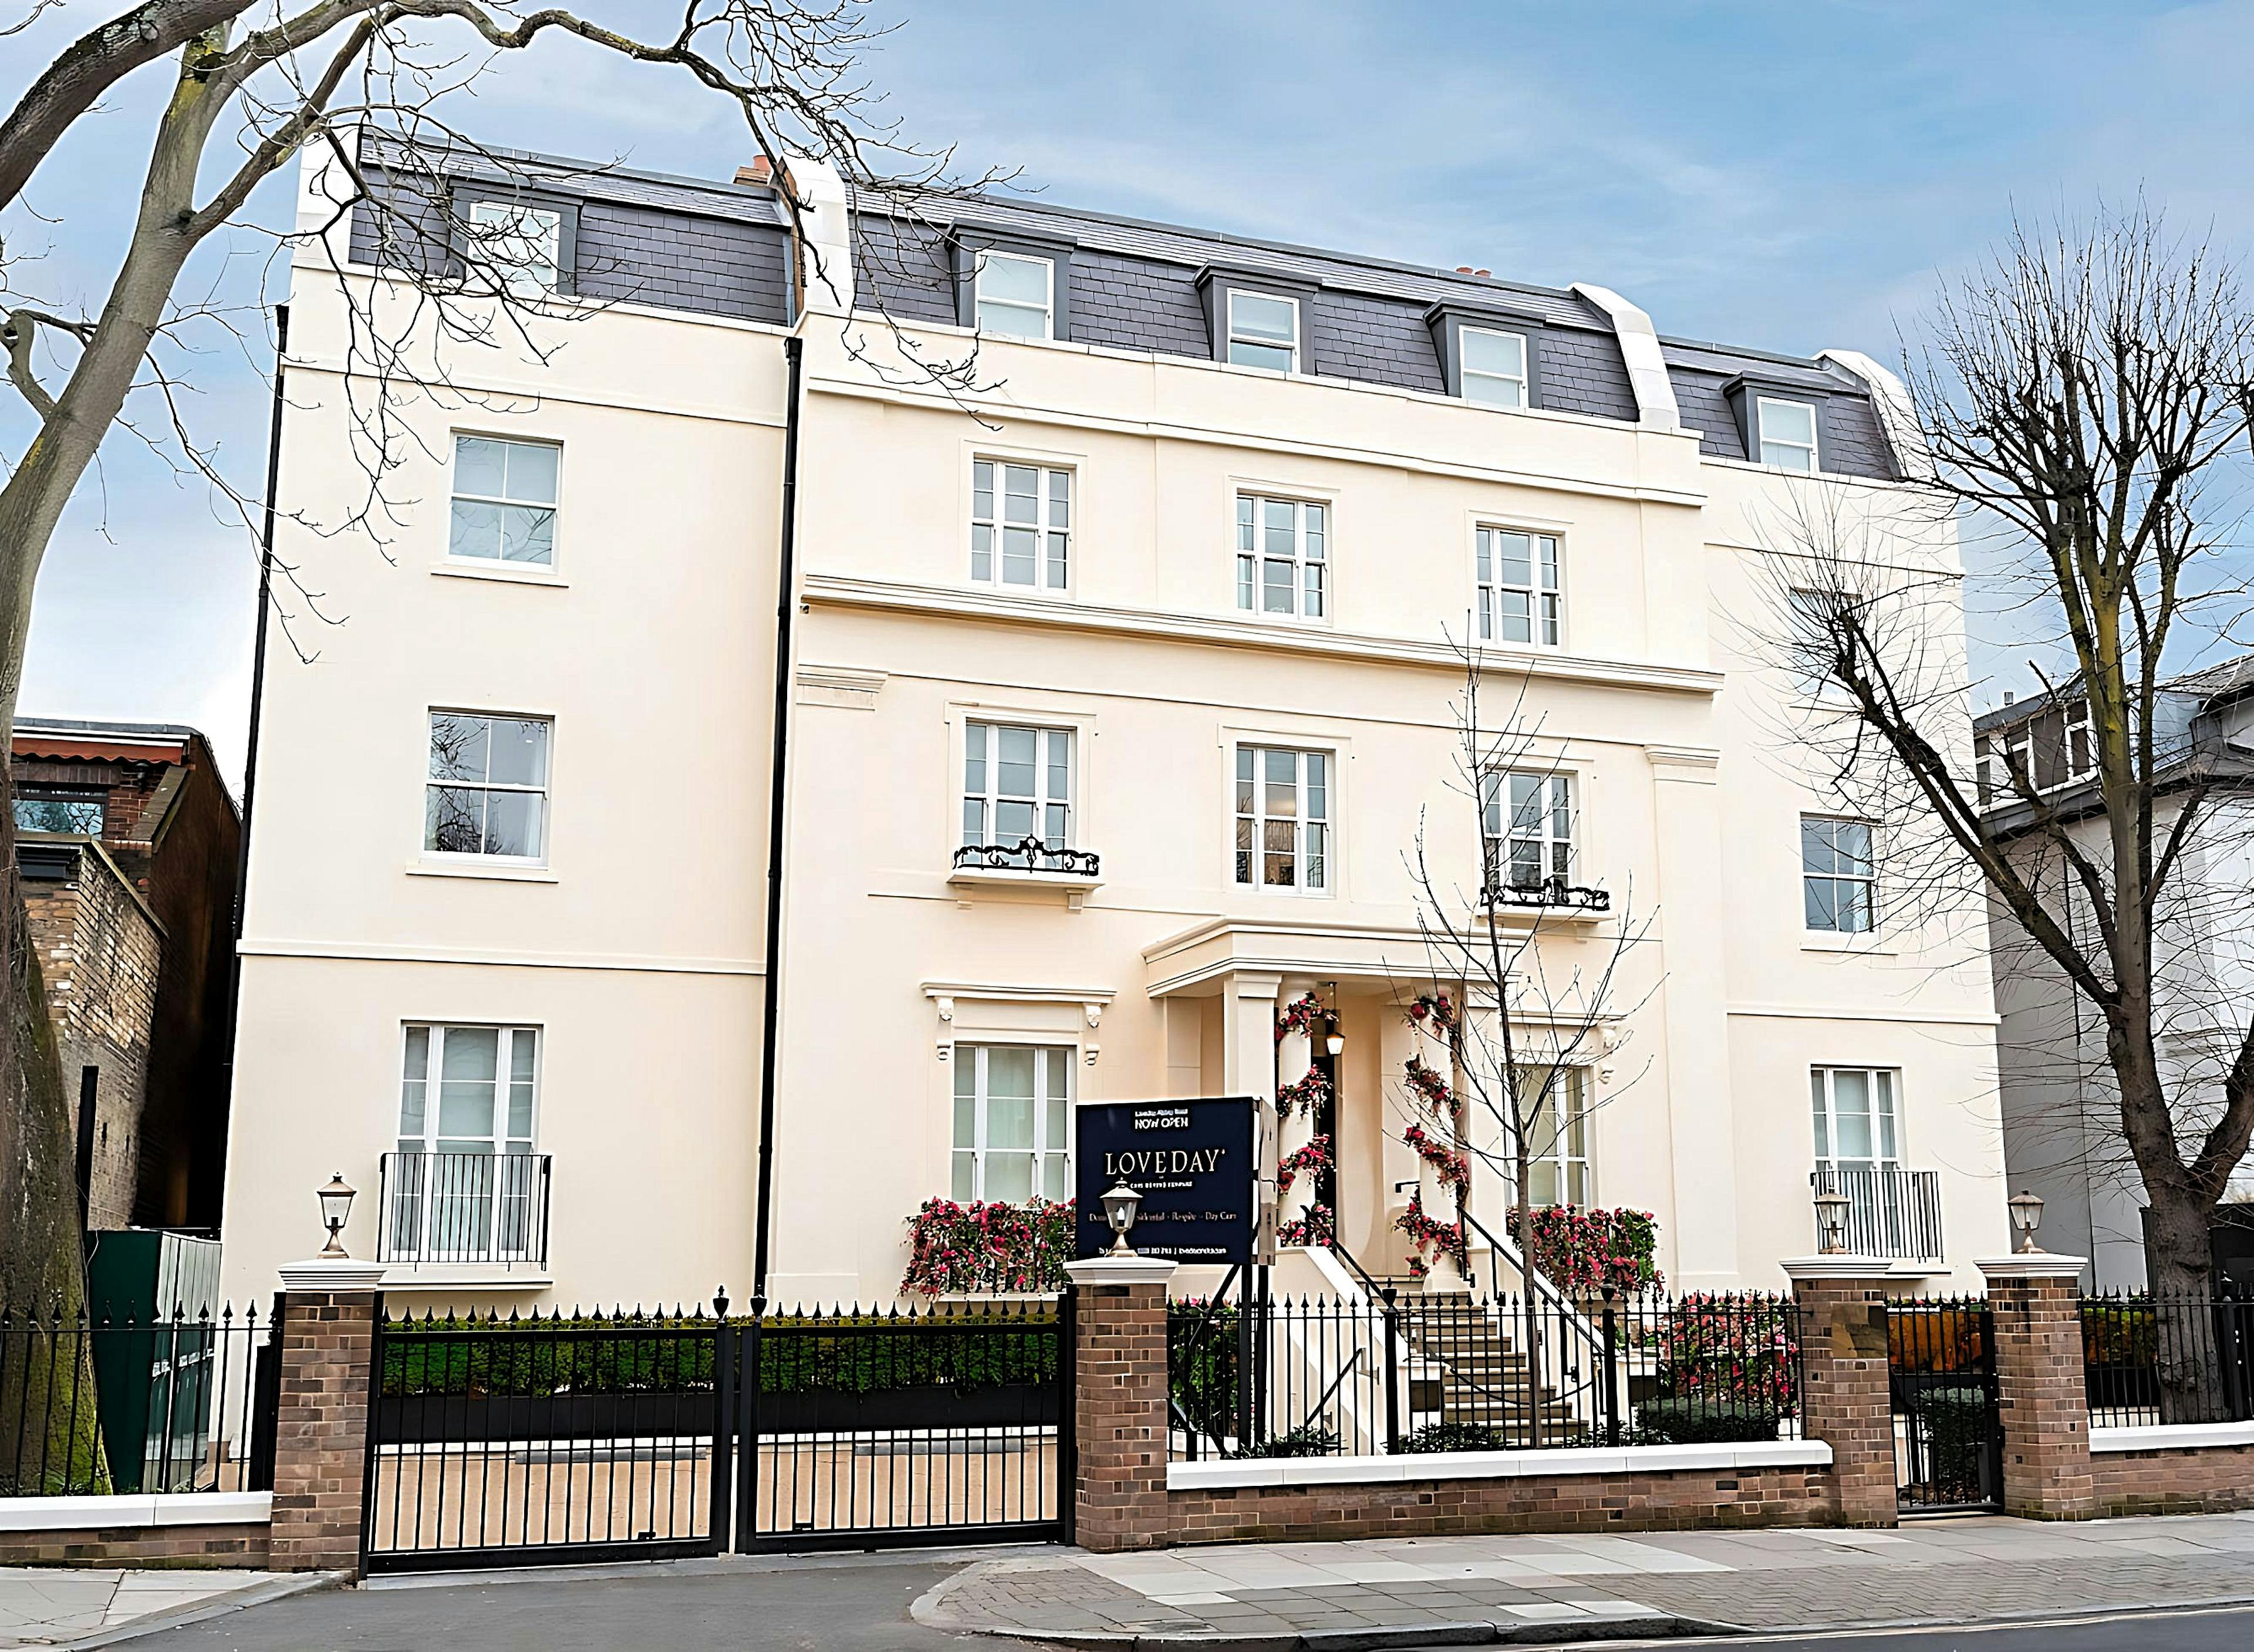 Exterior of Abbey Road Care Home in London, England